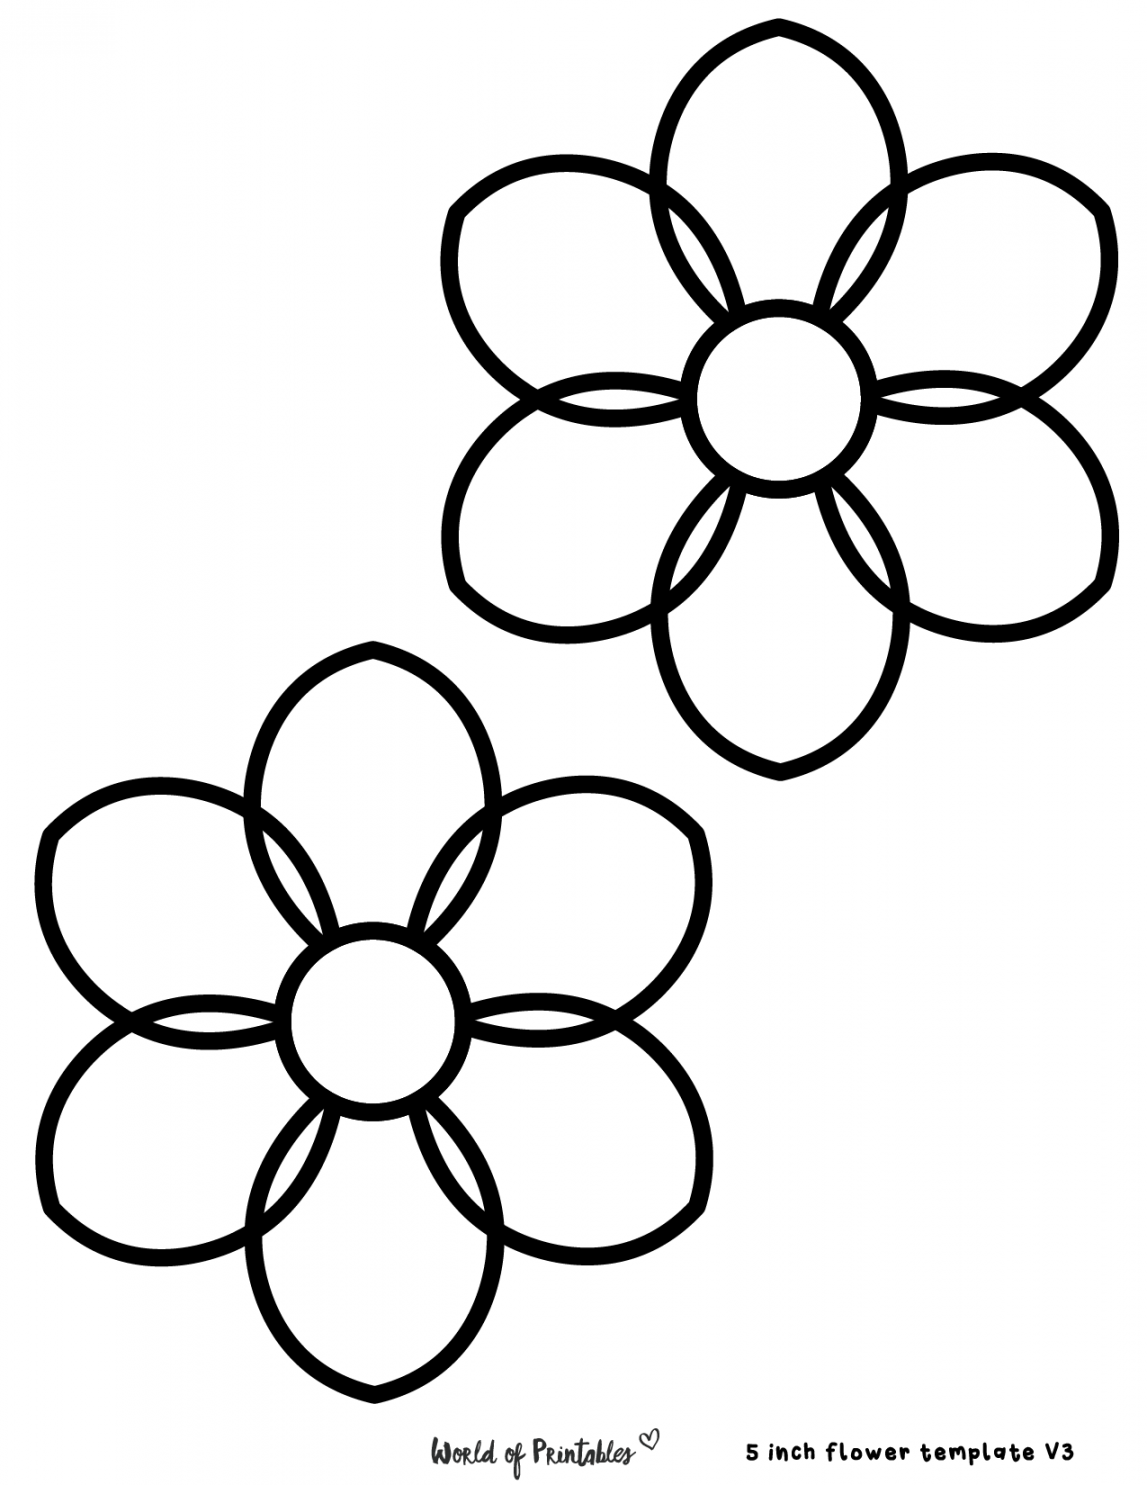 Best Free Flower Templates - World of Printables